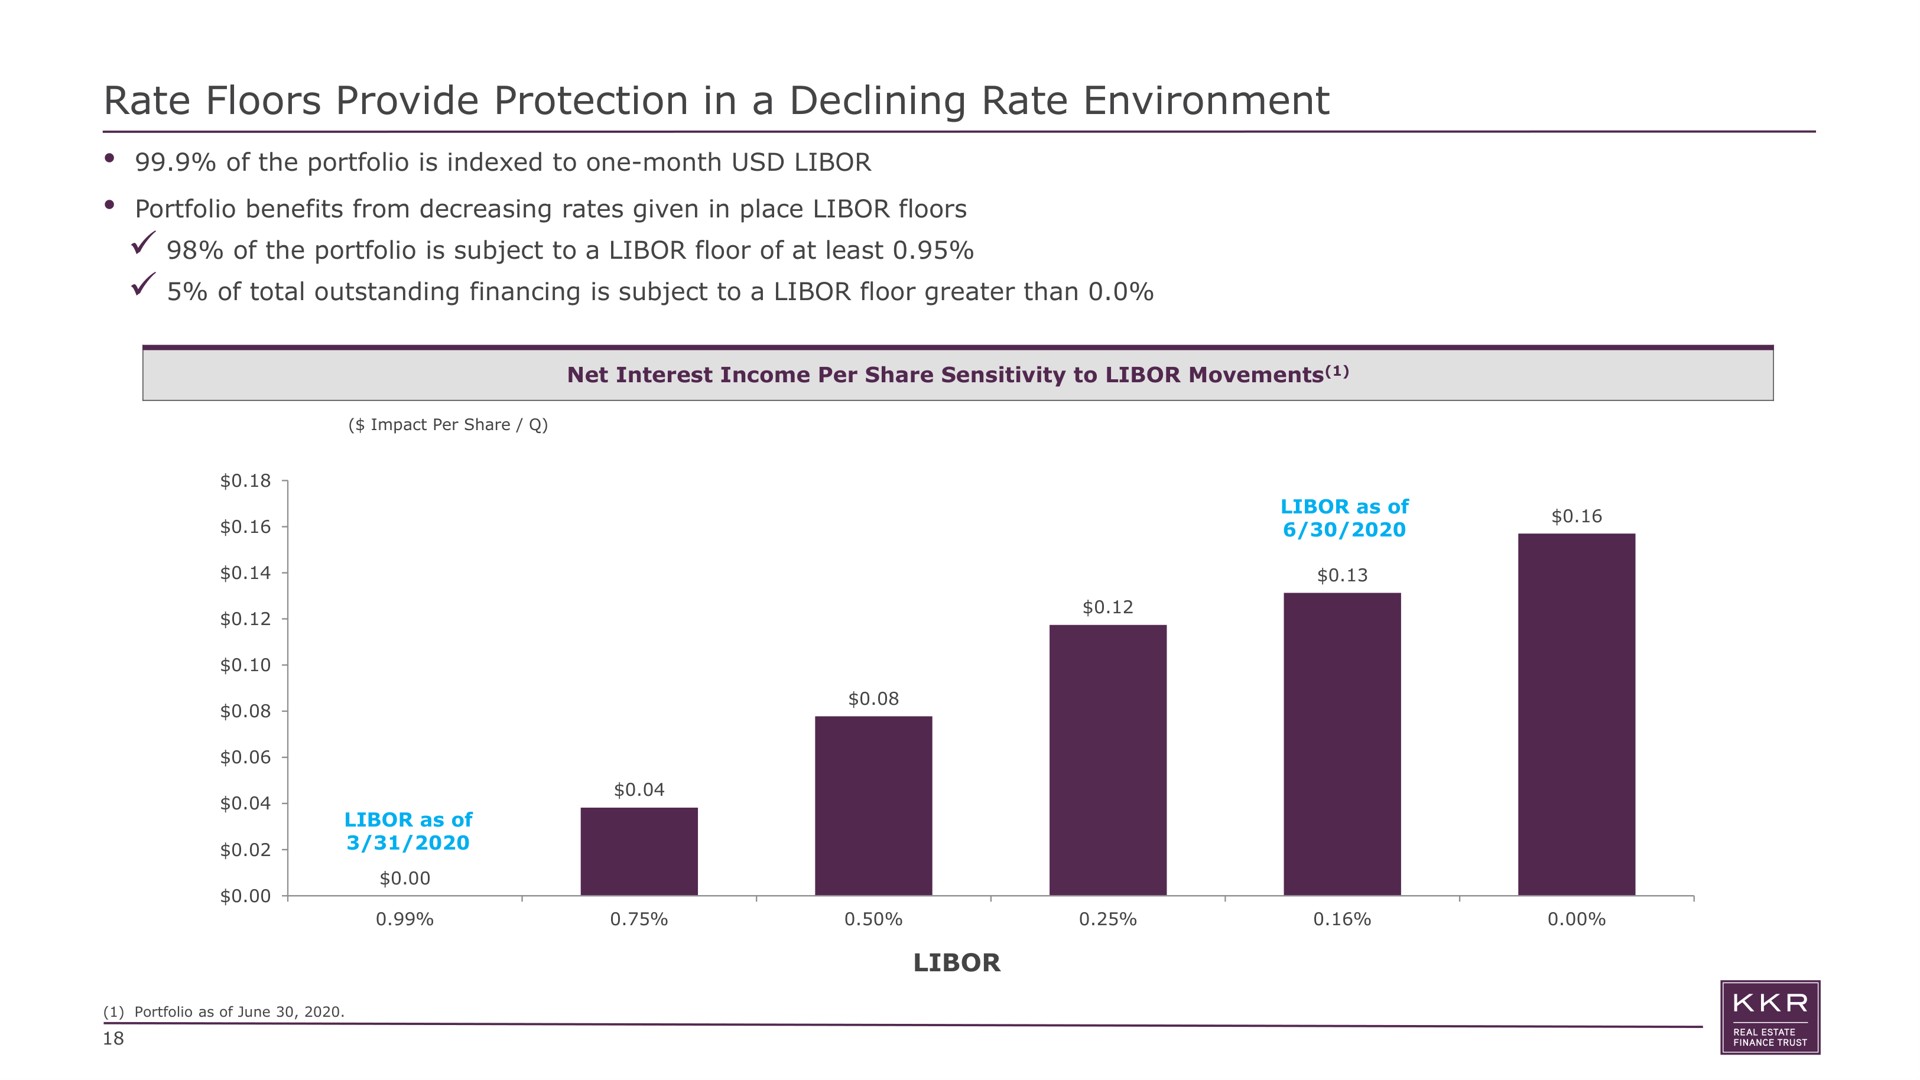 rate floors provide protection in a declining rate environment of the portfolio is indexed to one month portfolio benefits from decreasing rates given place of the portfolio is subject to floor of at least of total outstanding financing is subject to floor greater than net interest income per share sensitivity to movements | KKR Real Estate Finance Trust